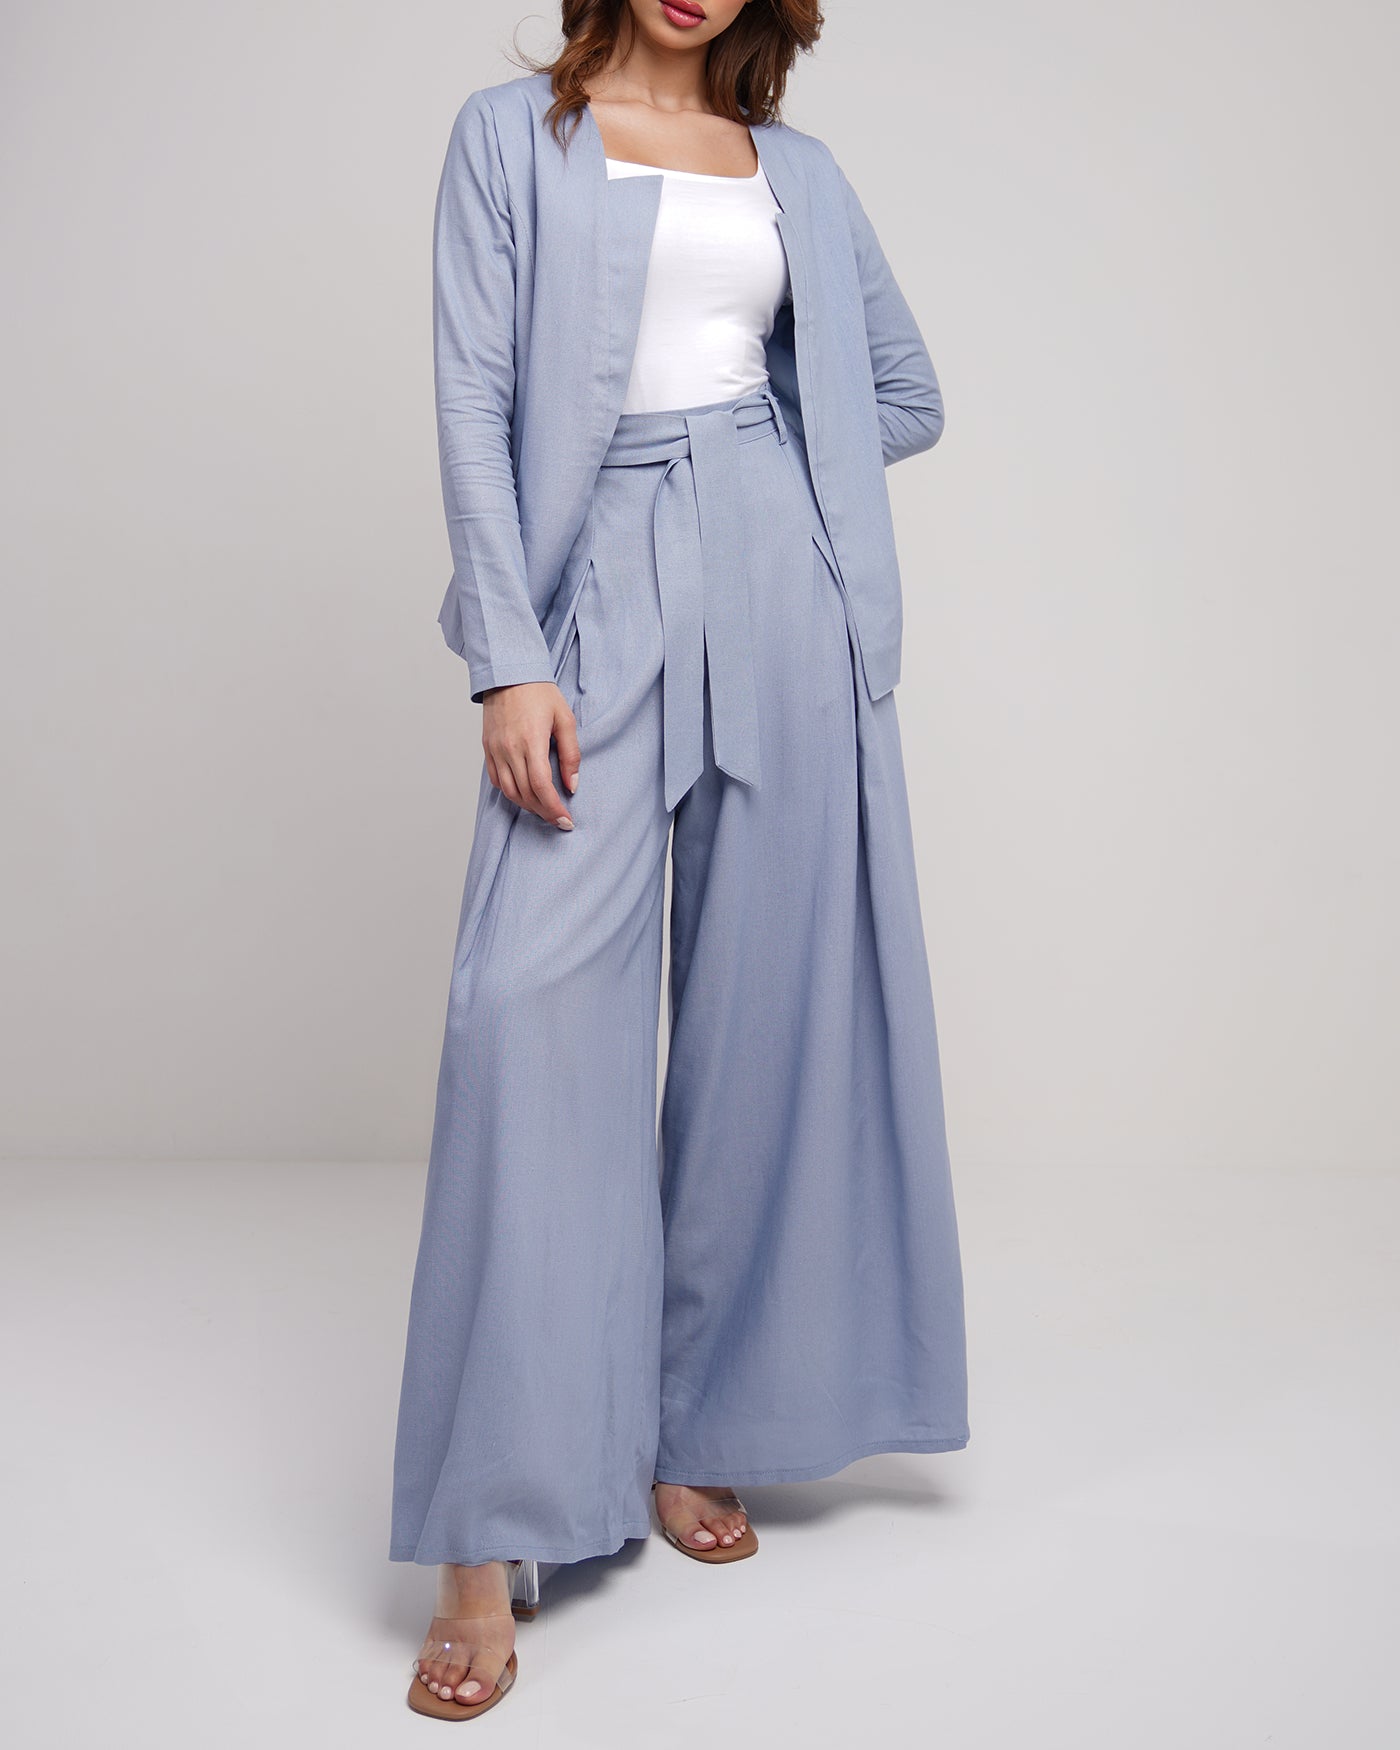 Cloud blue belted wide-legs trousers with long sleeves jacket